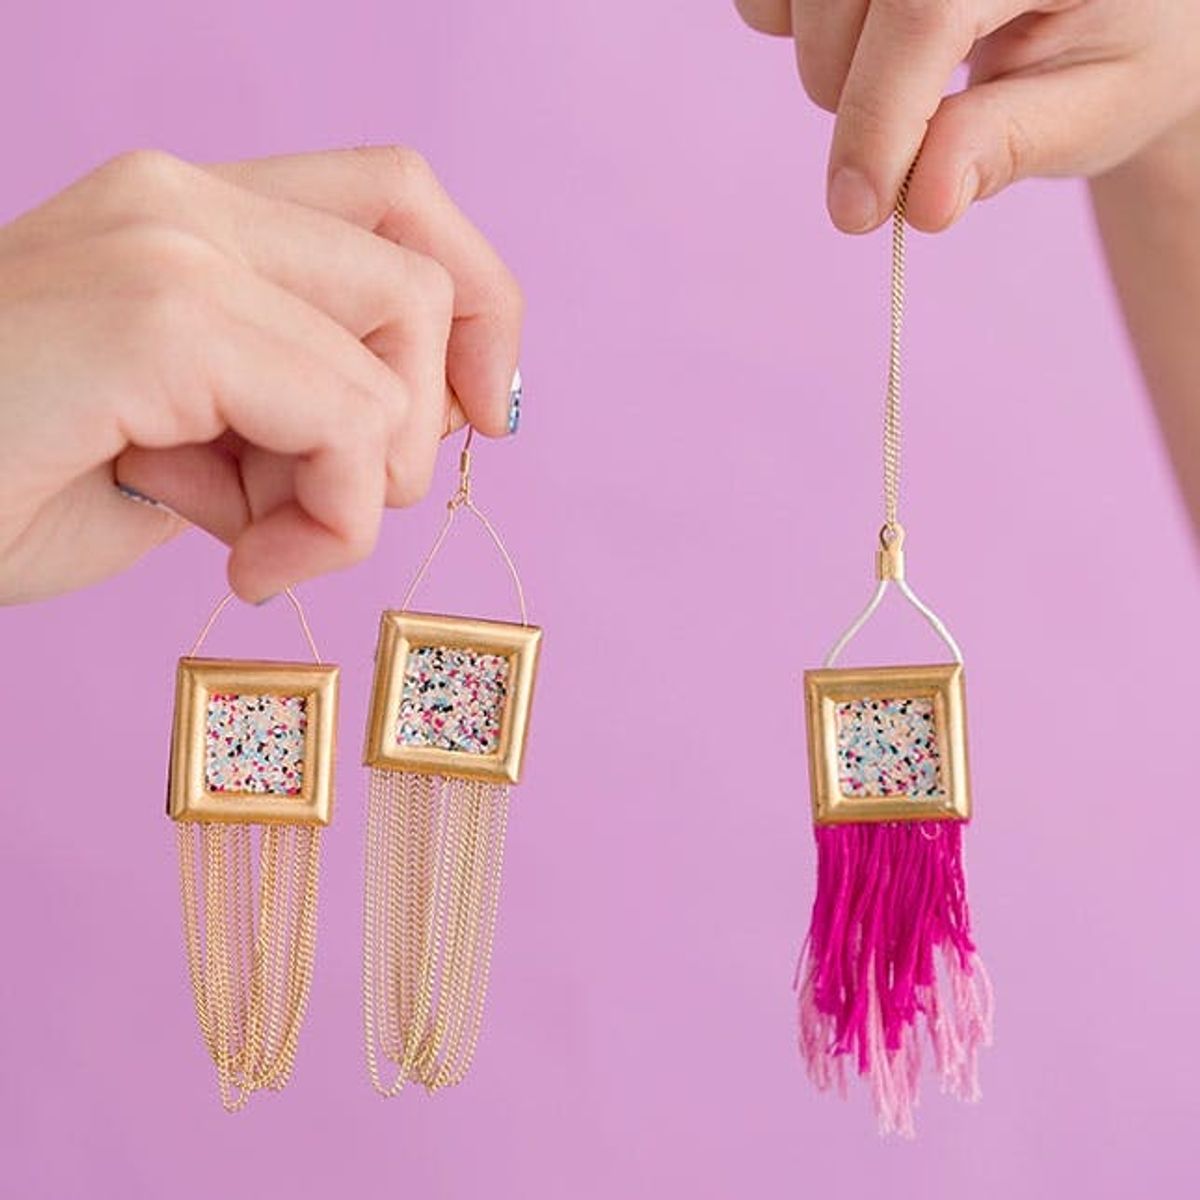 Make Your New Favorite Earrings With This Amazing Nail Polish Hack